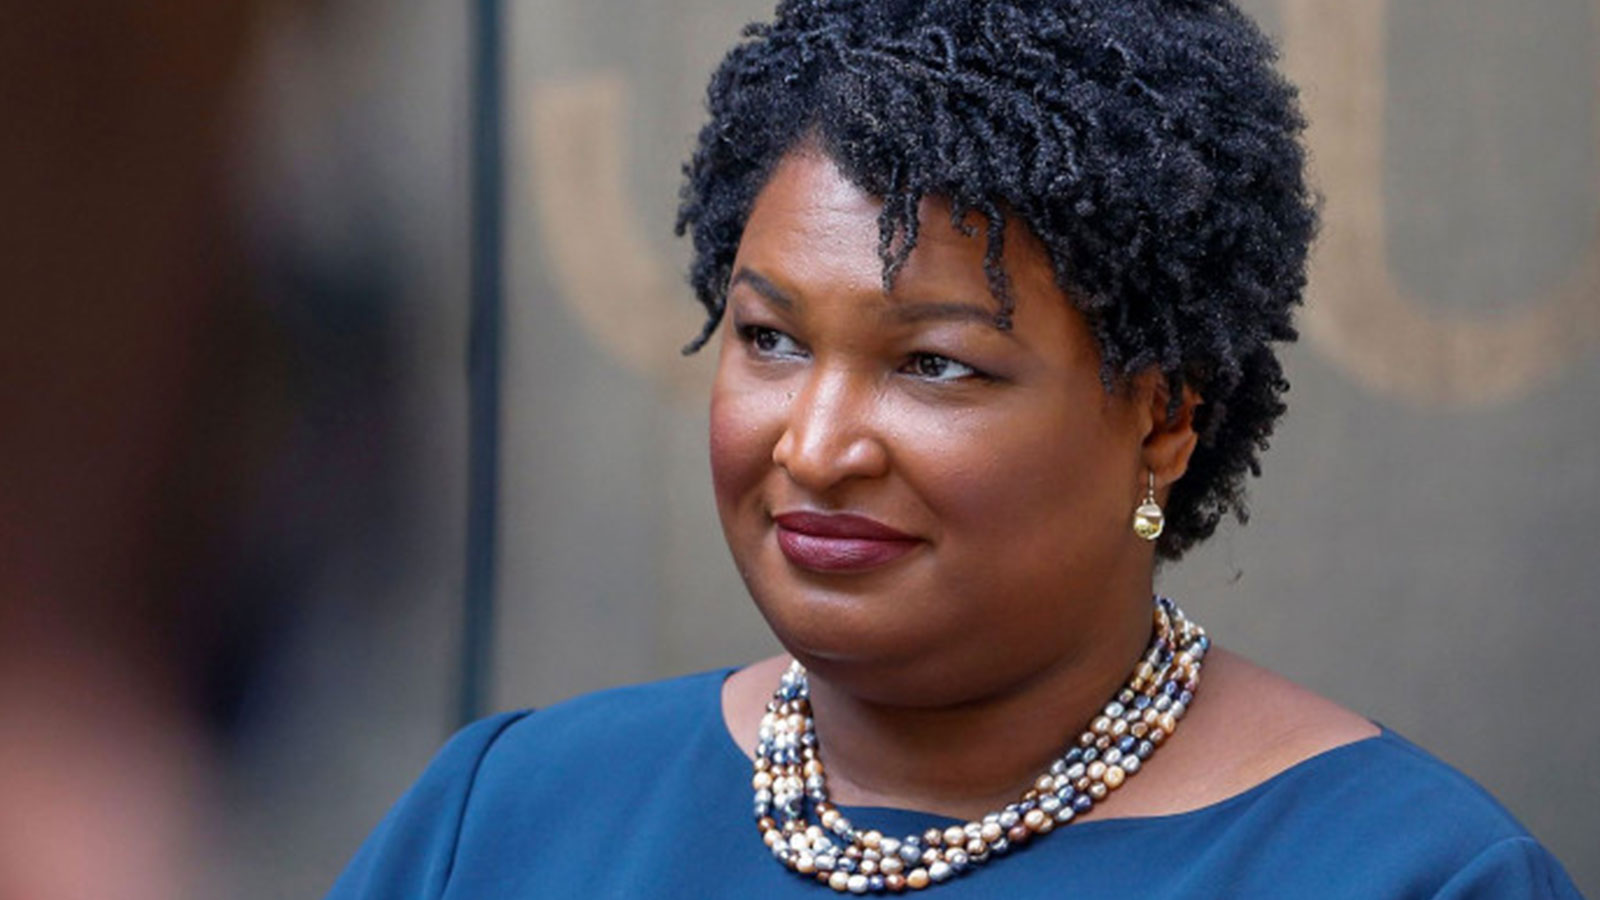 Stacey Abrams-led group launches campaign to mobilize young voters of color around voting rights bill